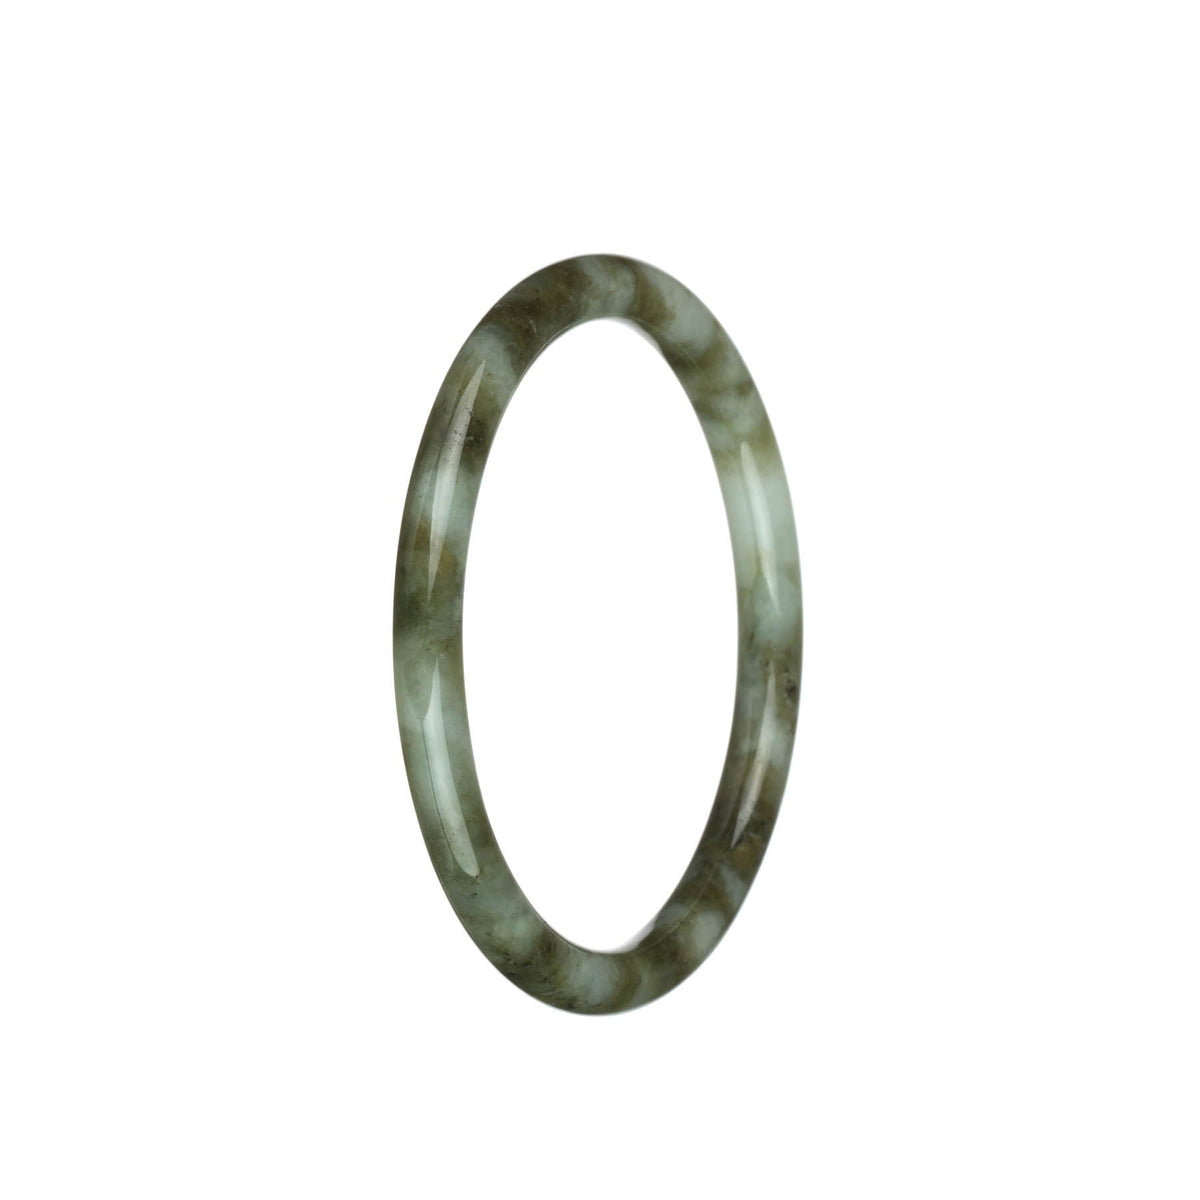 Genuine Untreated White with Olive Green and Brown Patters Jade Bangle - 60mm Petite Round